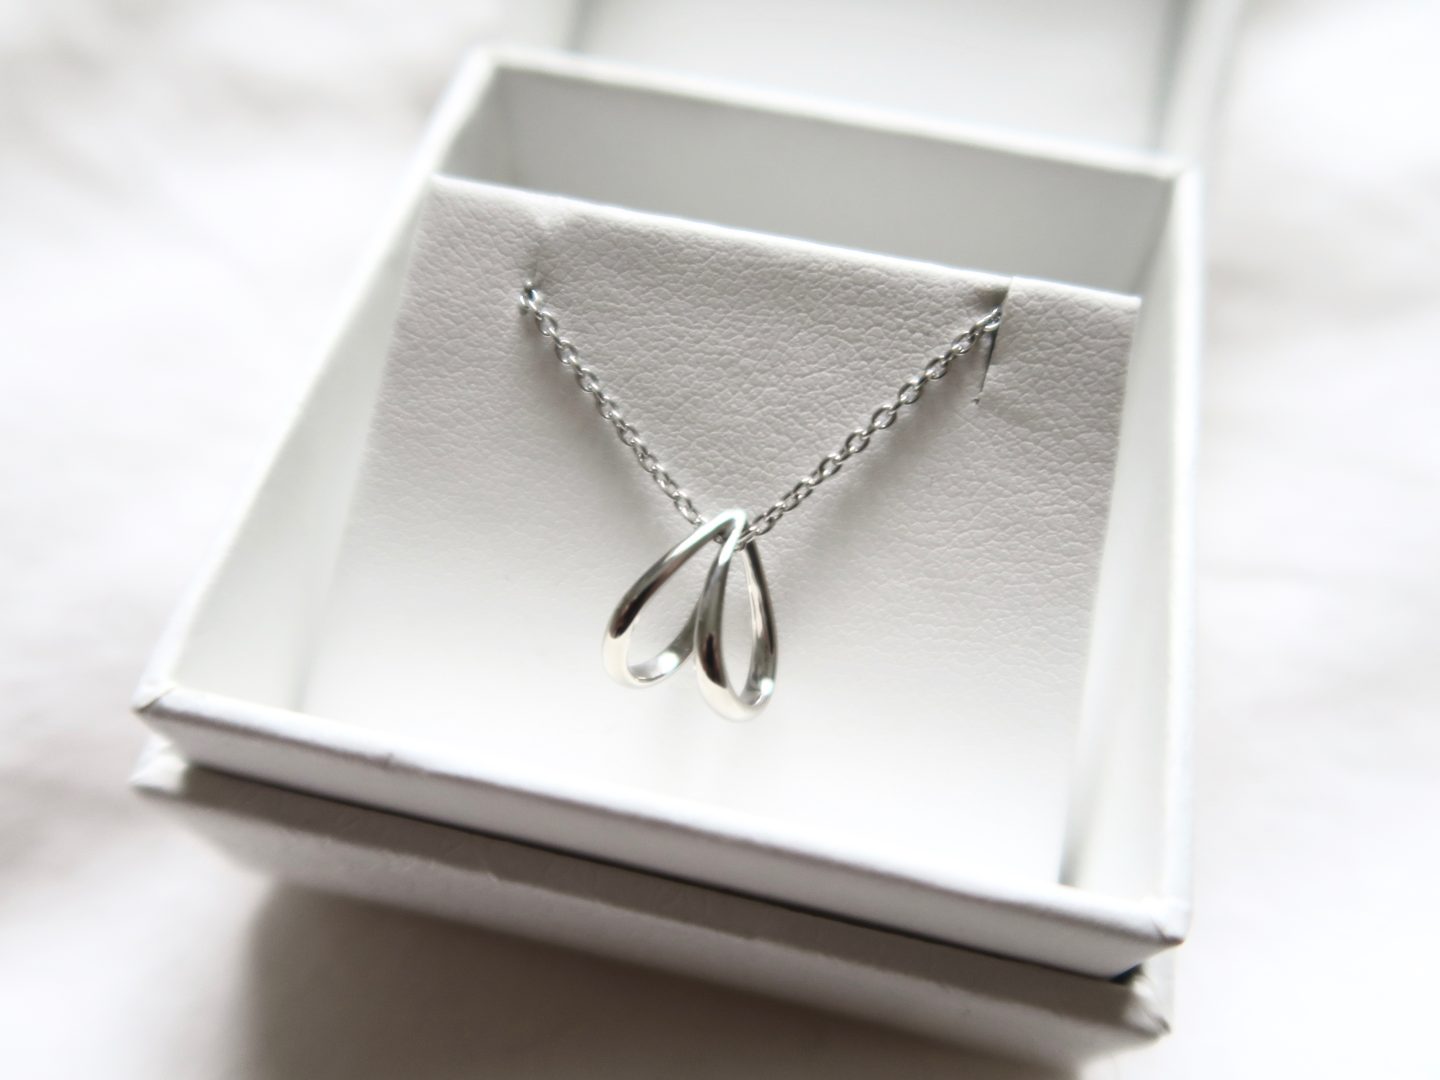 Sacet Recycled Silver Jewellery | Curiously Conscious